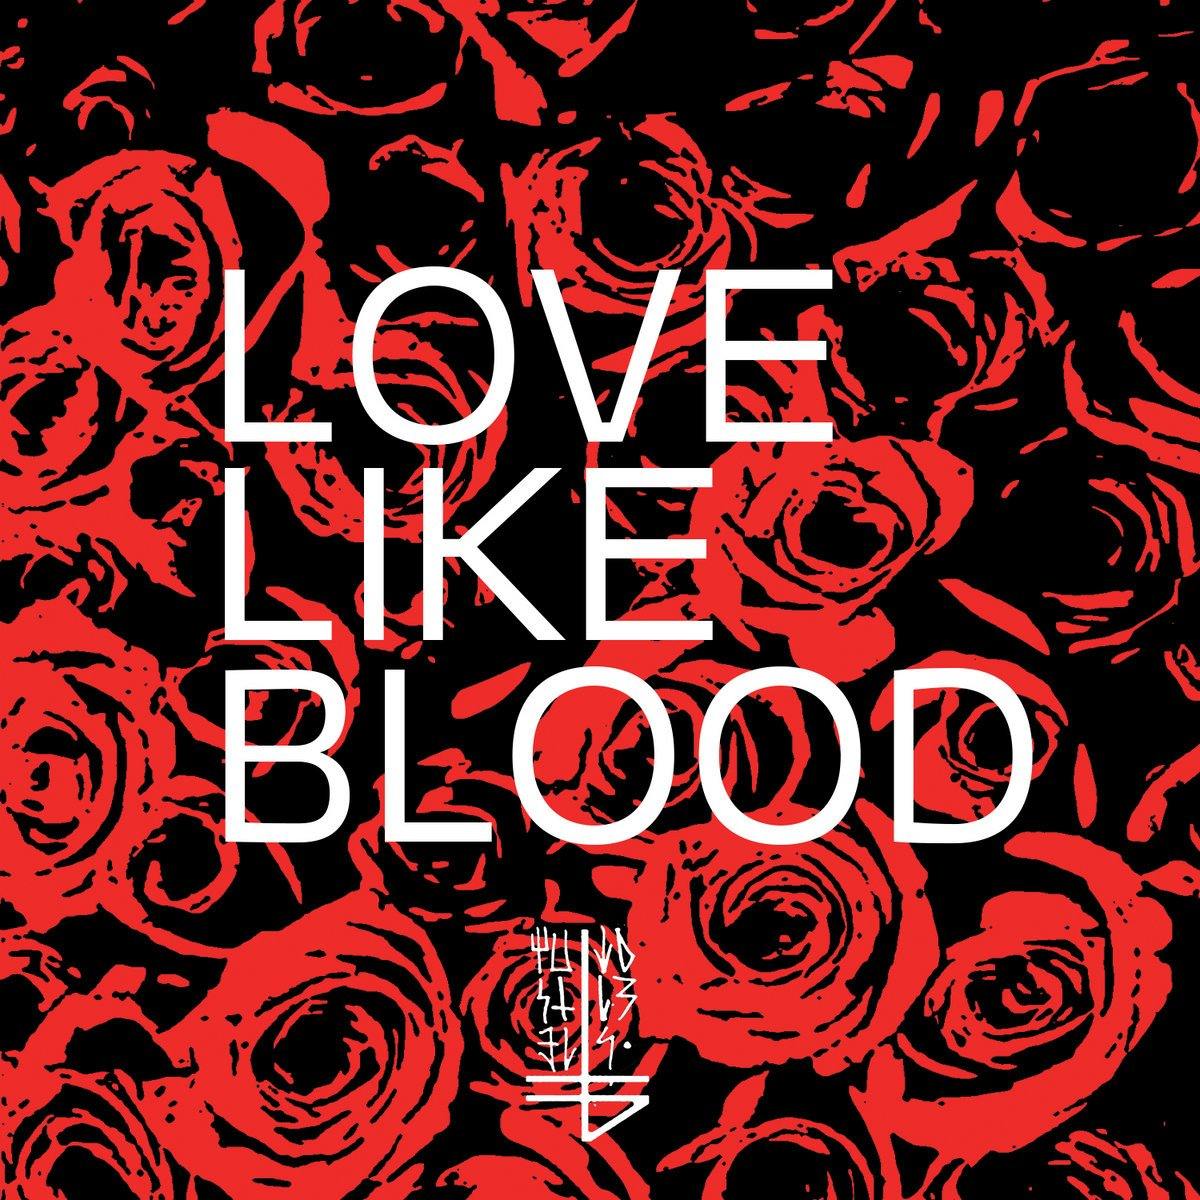 Buy – The Banner "Love Like Blood" Cassette – Band & Music Merch – Cold Cuts Merch